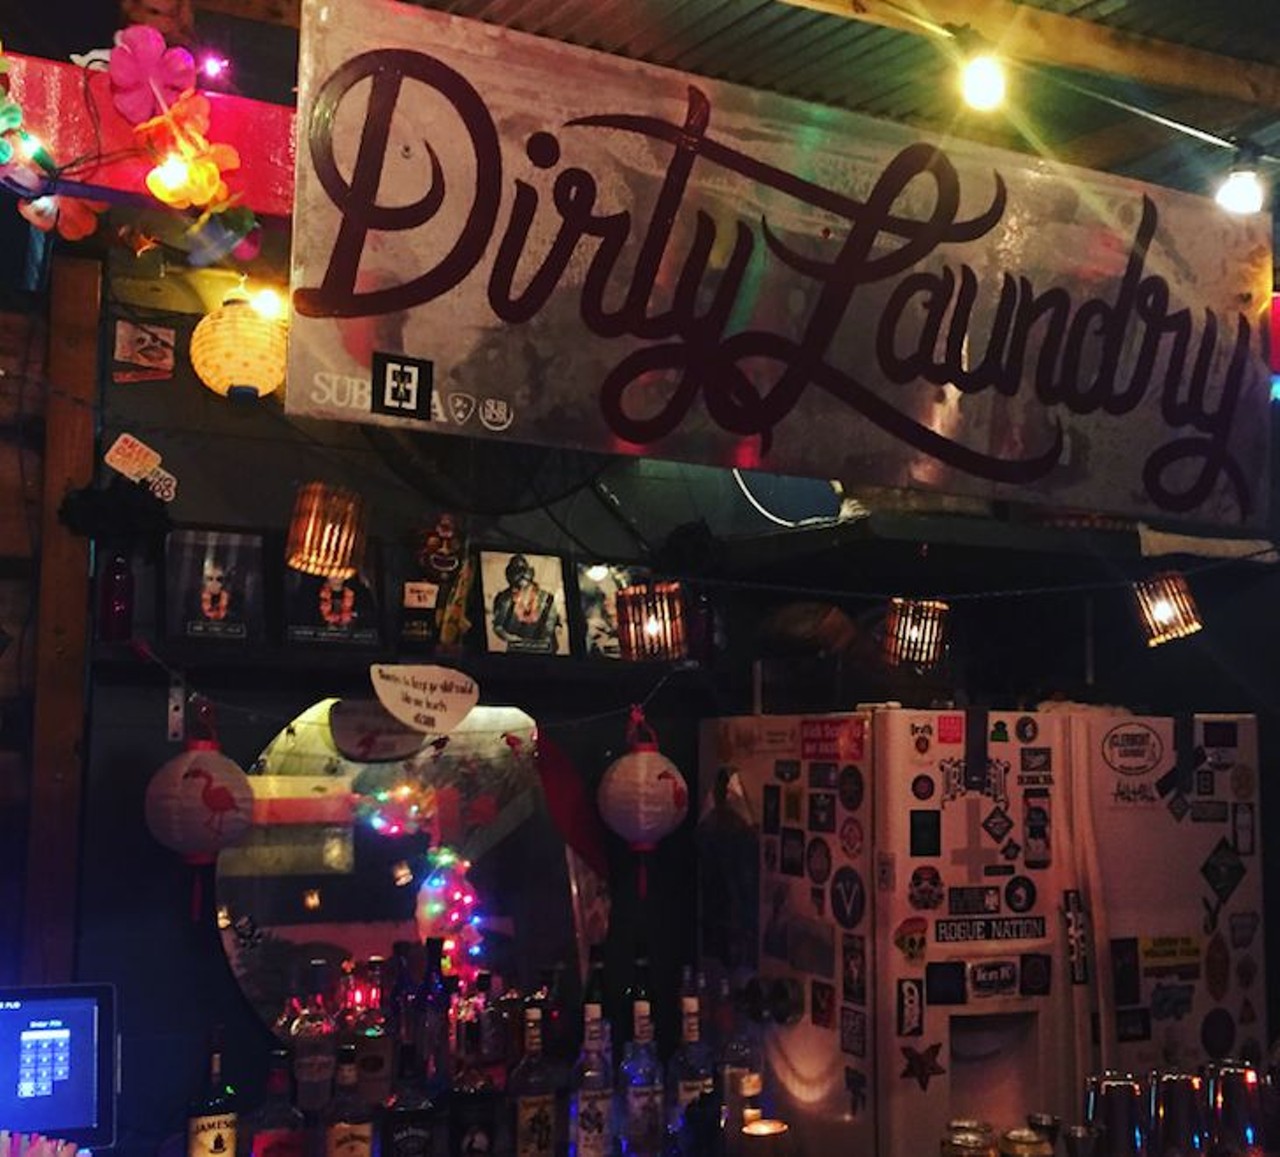 Dirty Laundry
1030 N. Mills Ave.
The intimate outdoor bar is a part of Will&#146;s Pub, so it&#146;s no surprise that this spot rocks. Enjoy cheap beers, tiki drinks, and the new boozy popsicles to keep you cool in the Florida heat, all while jamming to heavy metal. How&#146;s that for the best of both worlds?
Photo via dirtylaundry____/Instagram